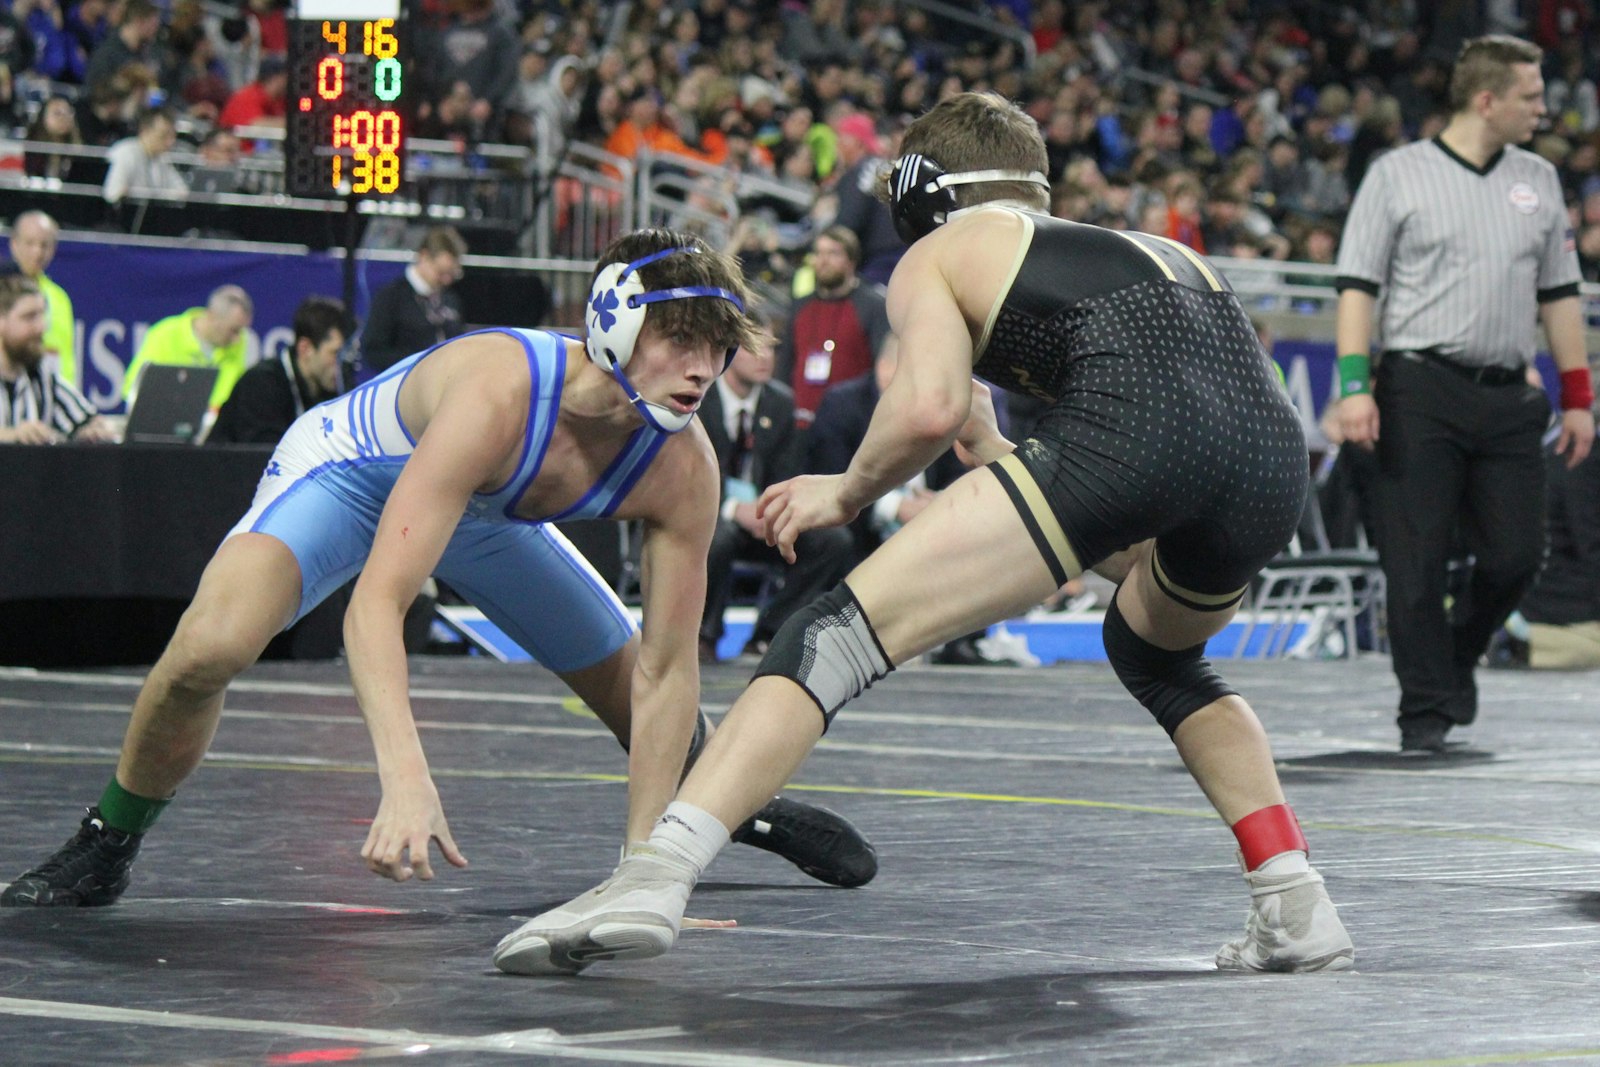 Catholic Central’s Mason Stewart stares down Davison’s Justin Gates in the 138-pound championship. Stewart lost a 2-1 heartbreaker after Gates scored a reversal in the final period.